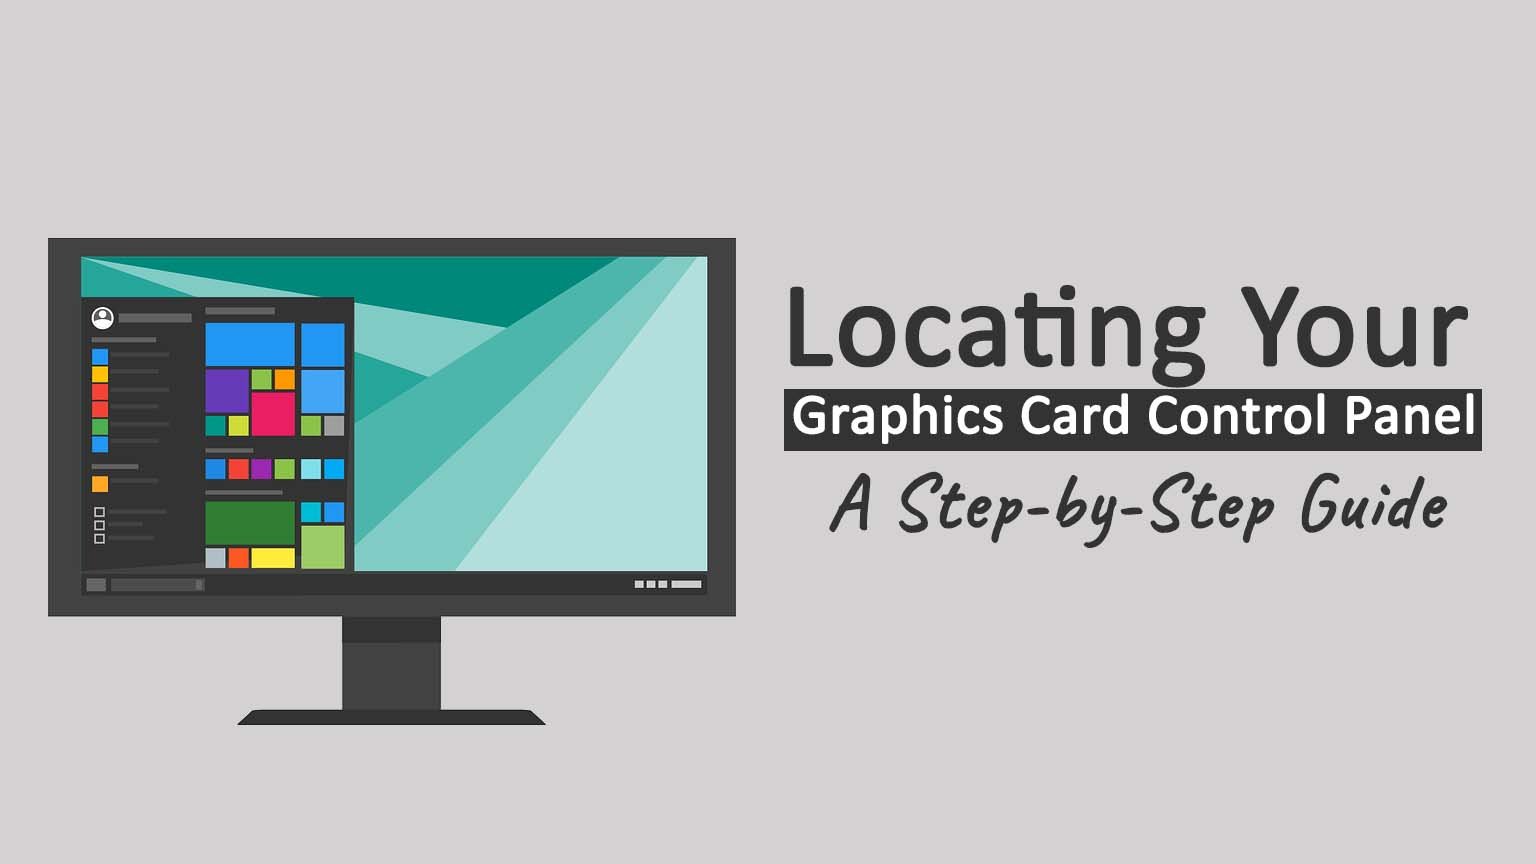 Locating Your Graphics Card Control Panel A Step-by-Step Guide